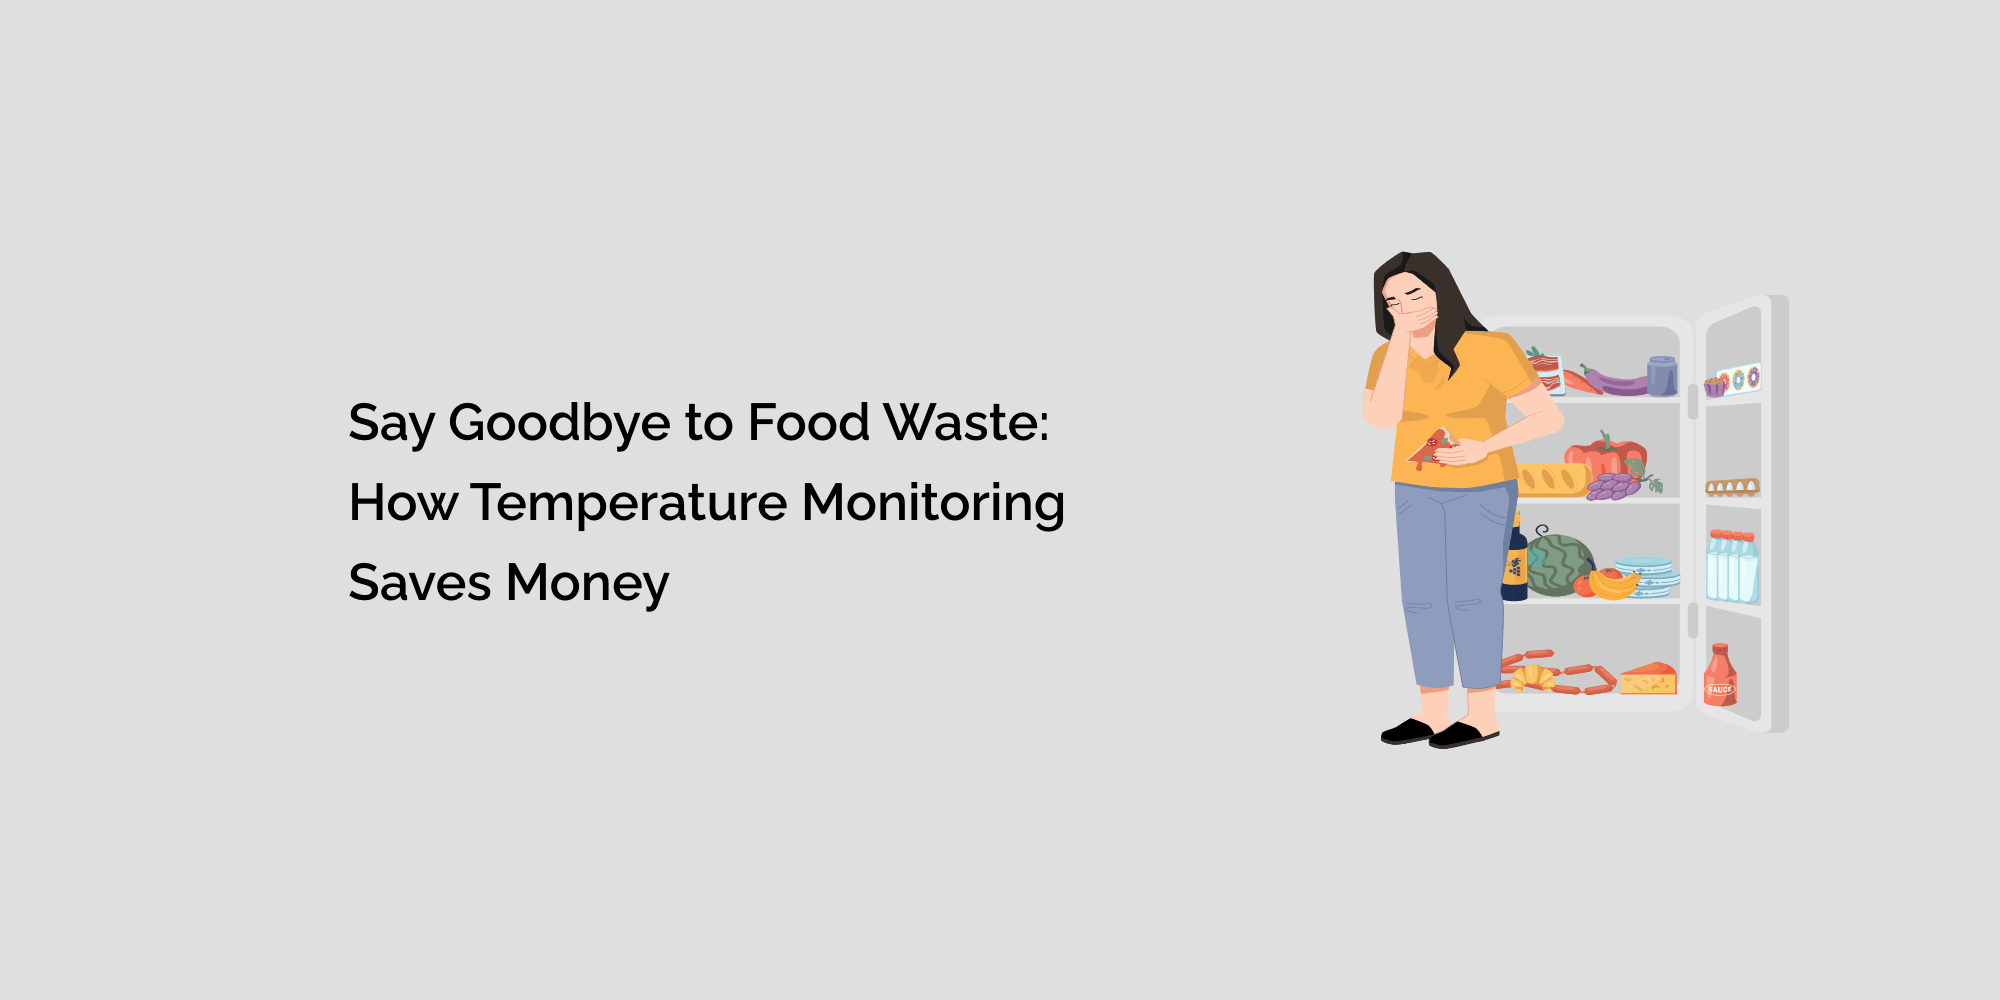 Say Goodbye to Food Waste: How Temperature Monitoring Saves Money